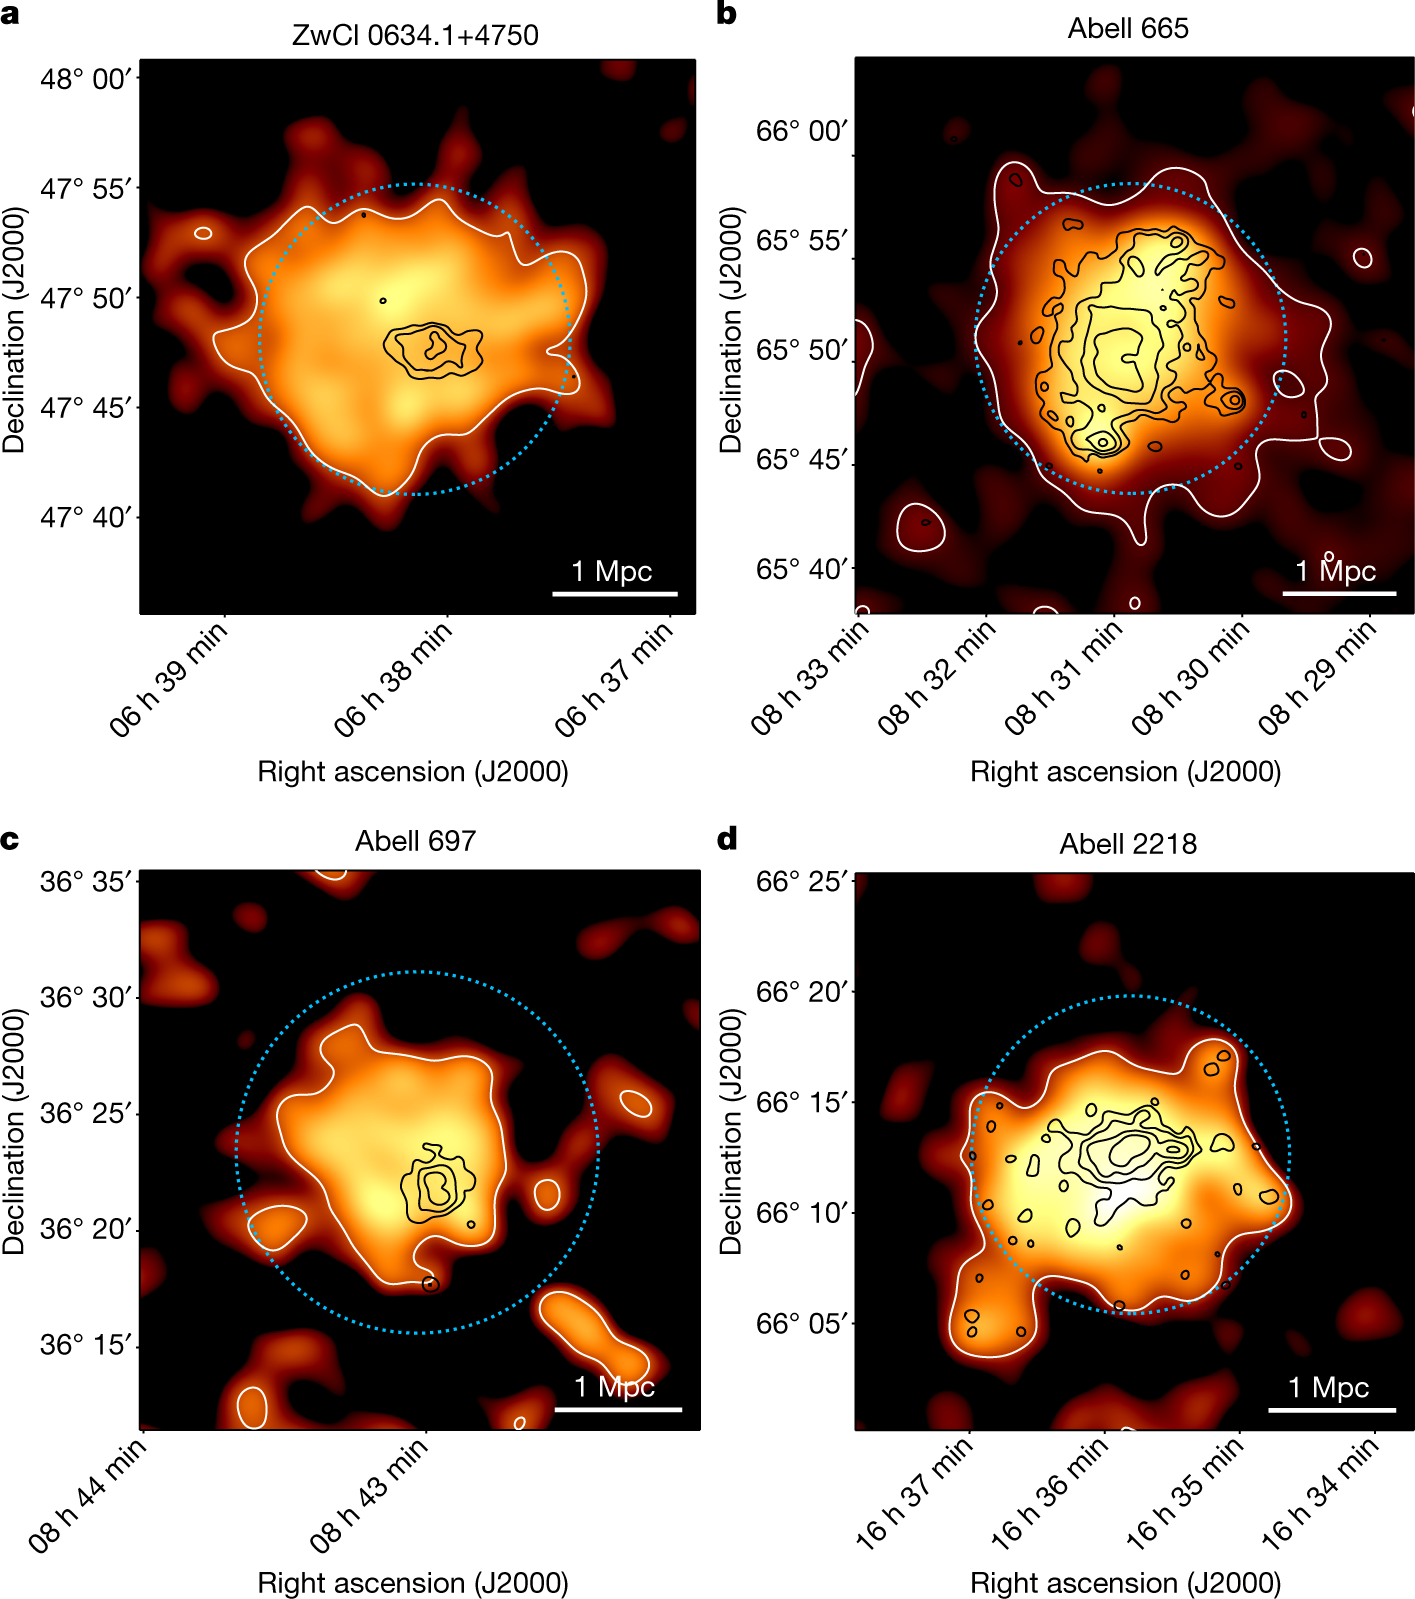 Galaxy clusters enveloped by vast volumes of relativistic electrons | Nature